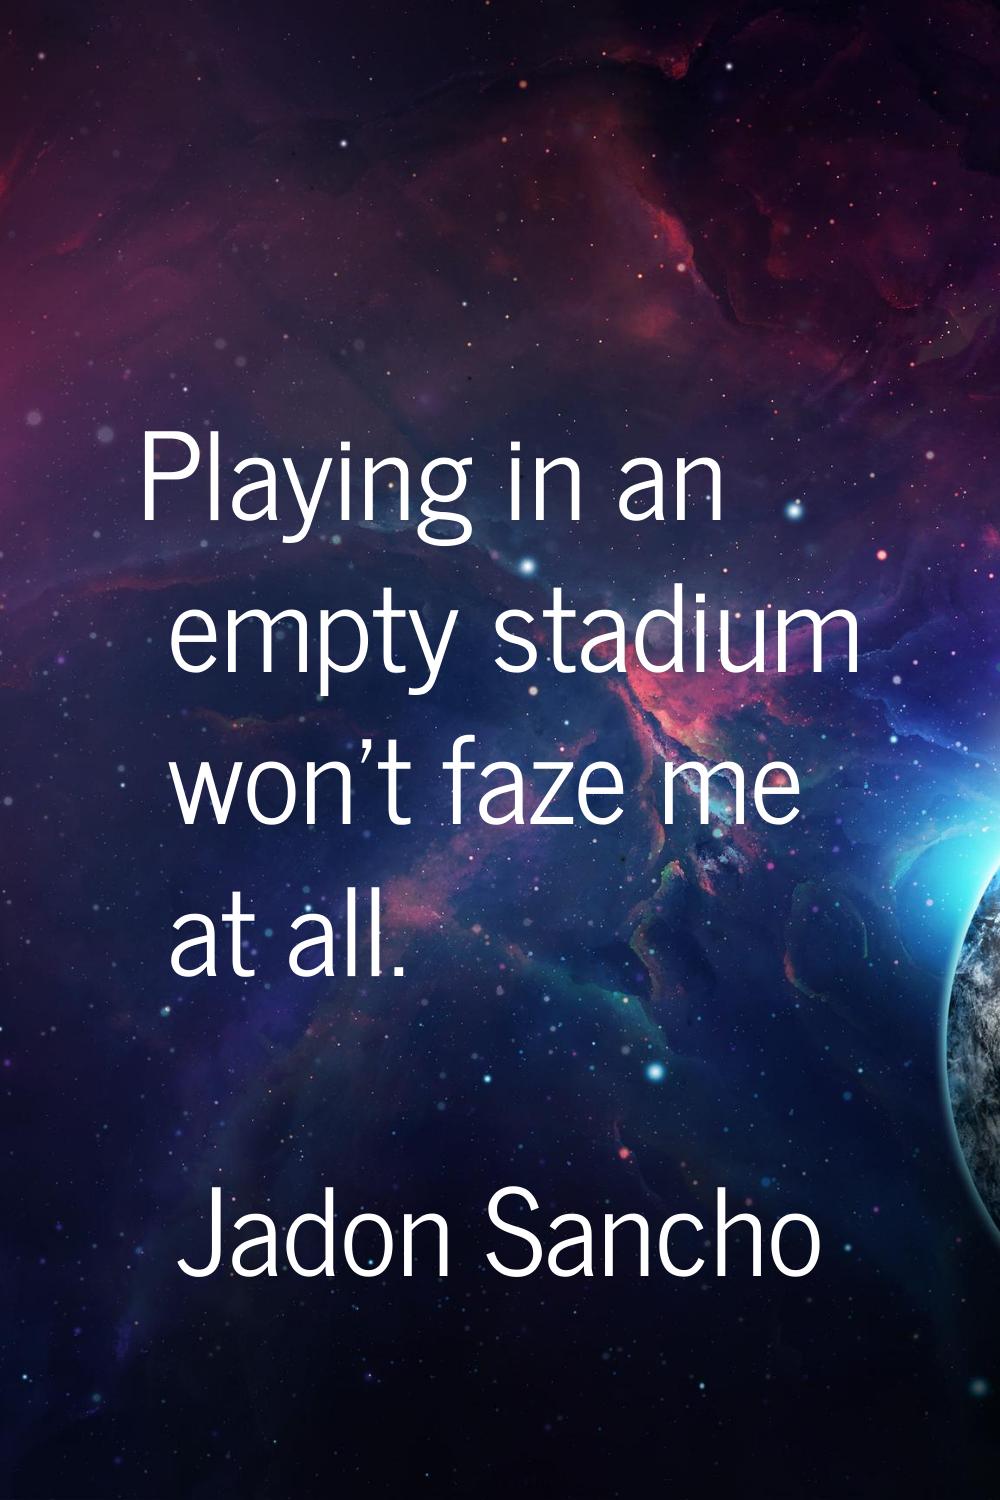 Playing in an empty stadium won't faze me at all.